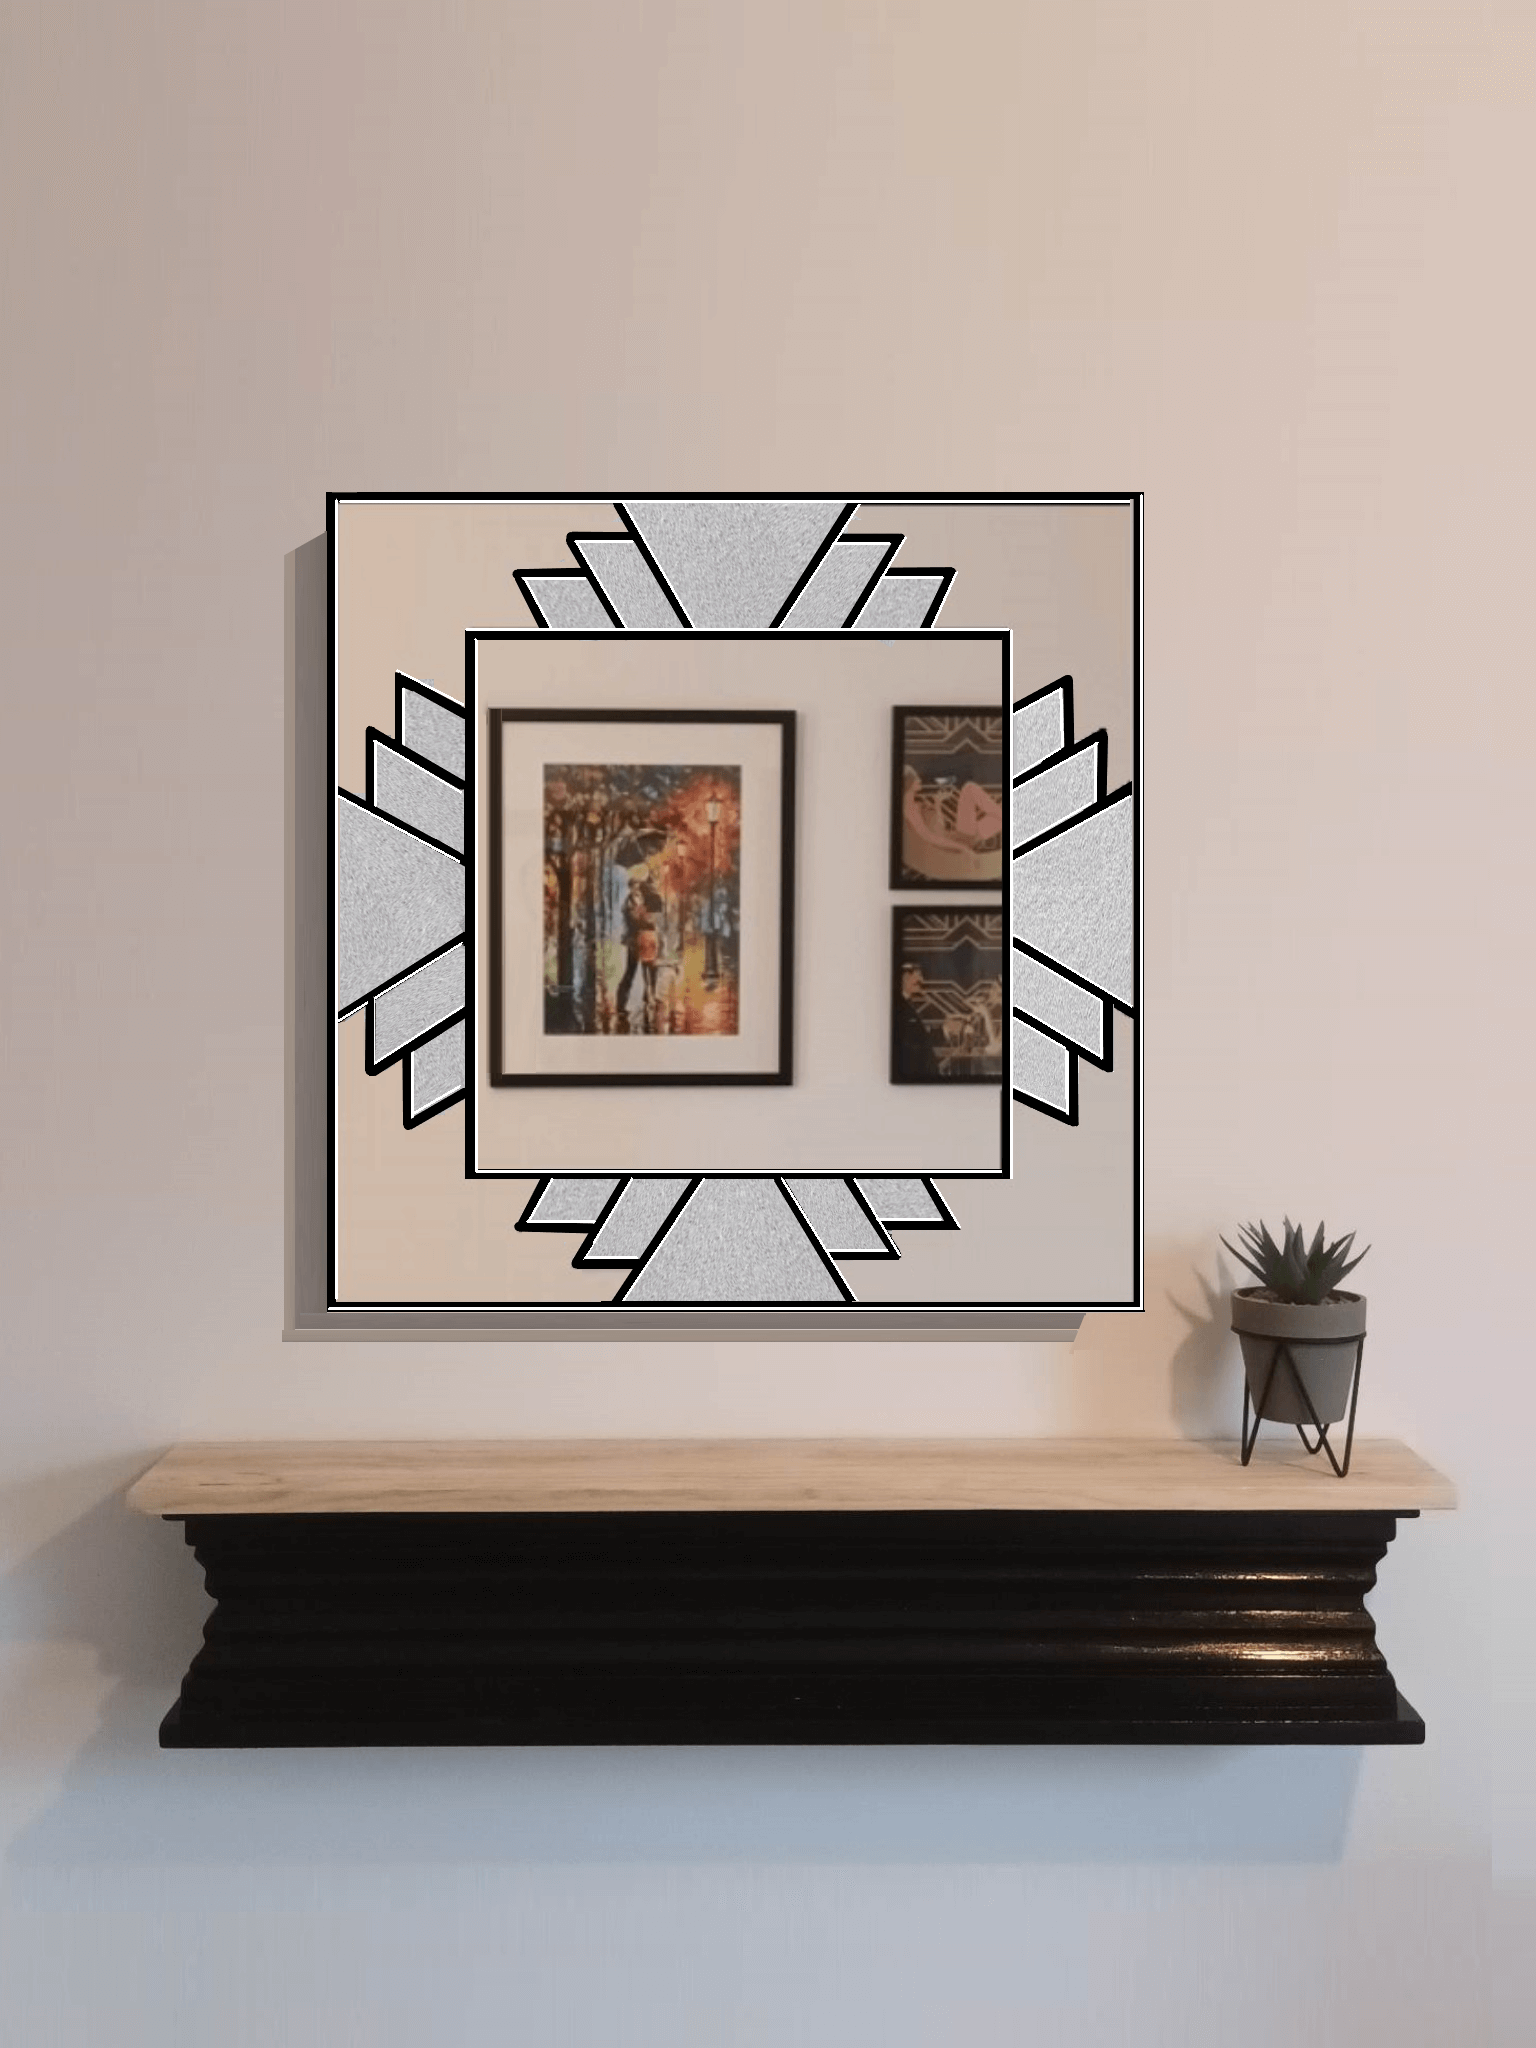 Large black stain glass mirror